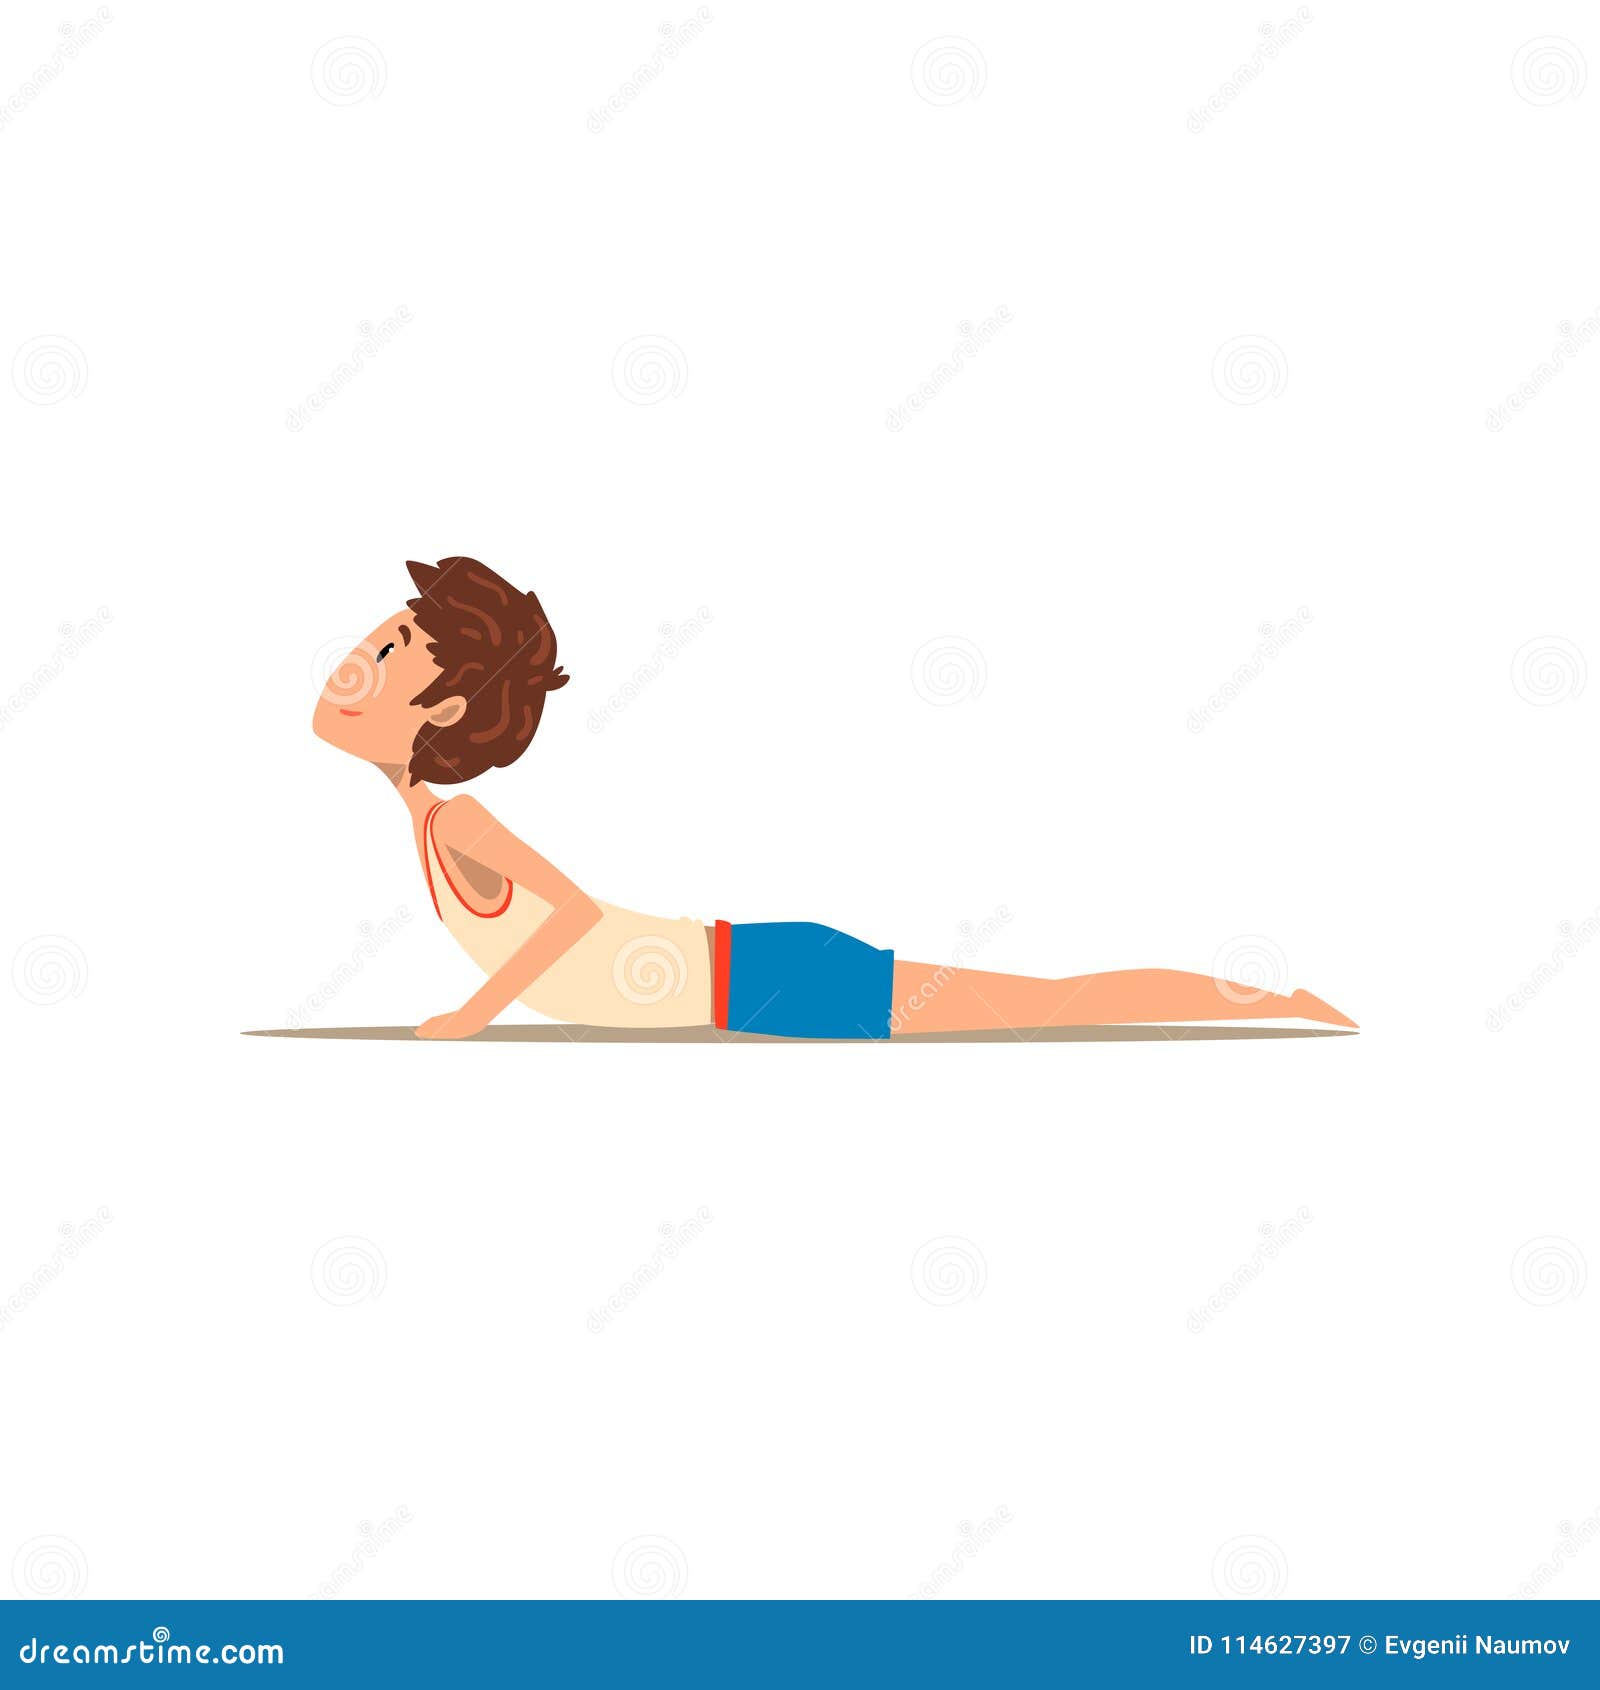 Try This Yoga Pose NOW to Feel Stronger, Lighter and Pain-Free | SELF